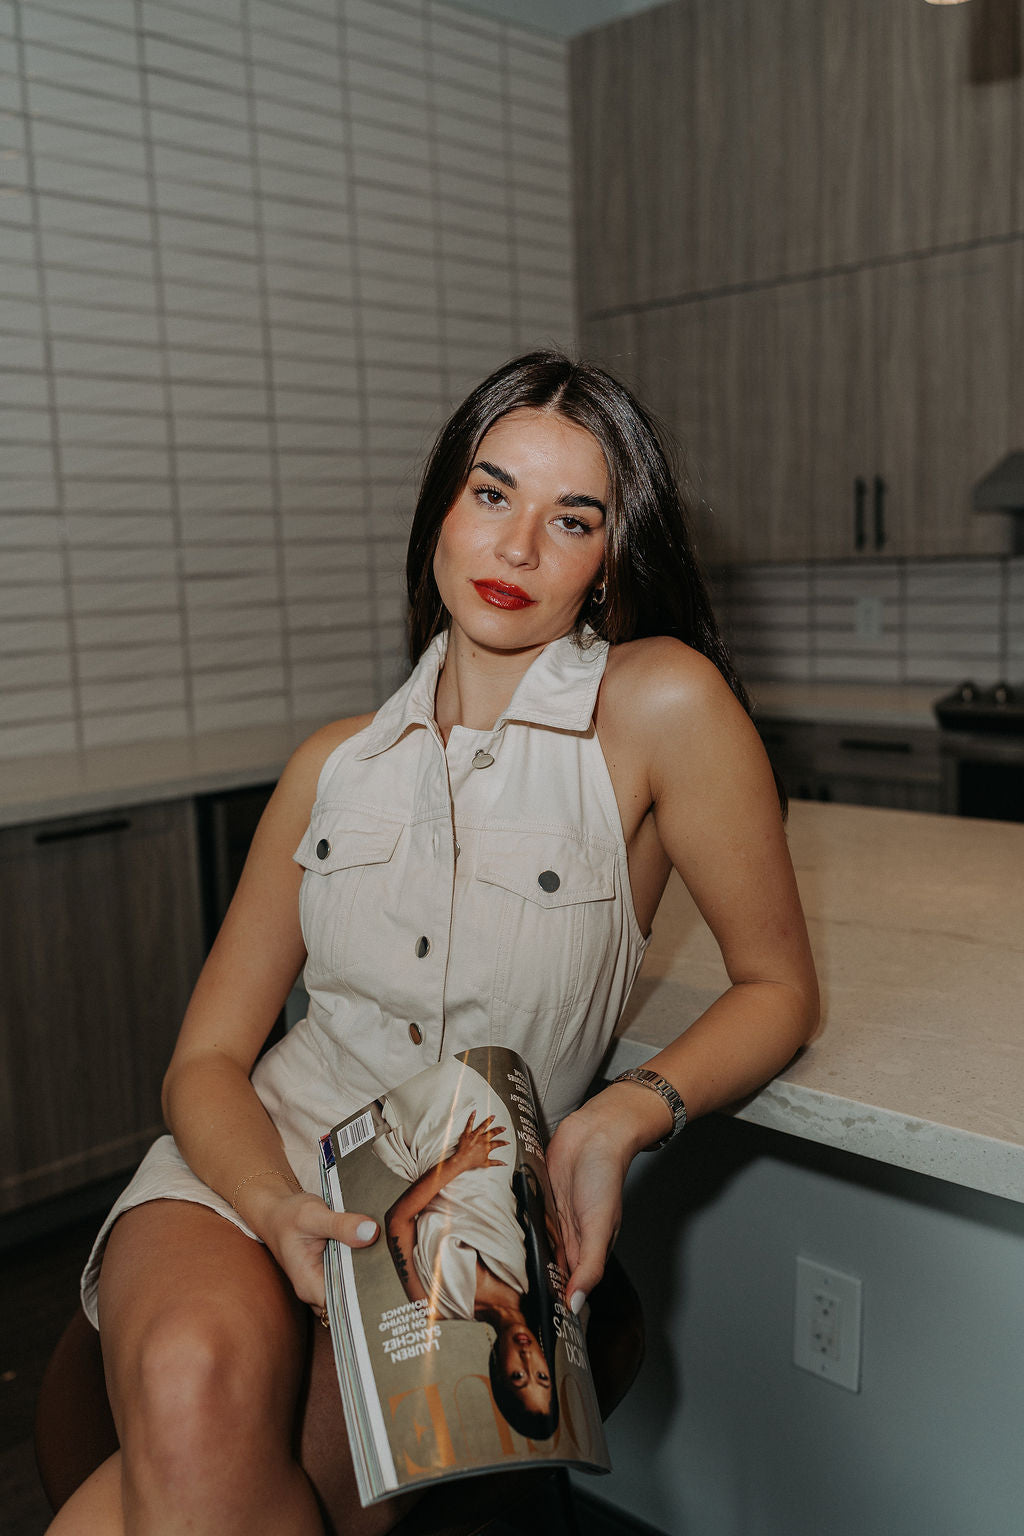 Model is sitting while wearing the cream colored Eleanor Sleeveless Button Front Mini Dress that has cotton fabric, a button-up front with silver buttons, buttoned chest pockets, a collared neckline, and a racerback cut.